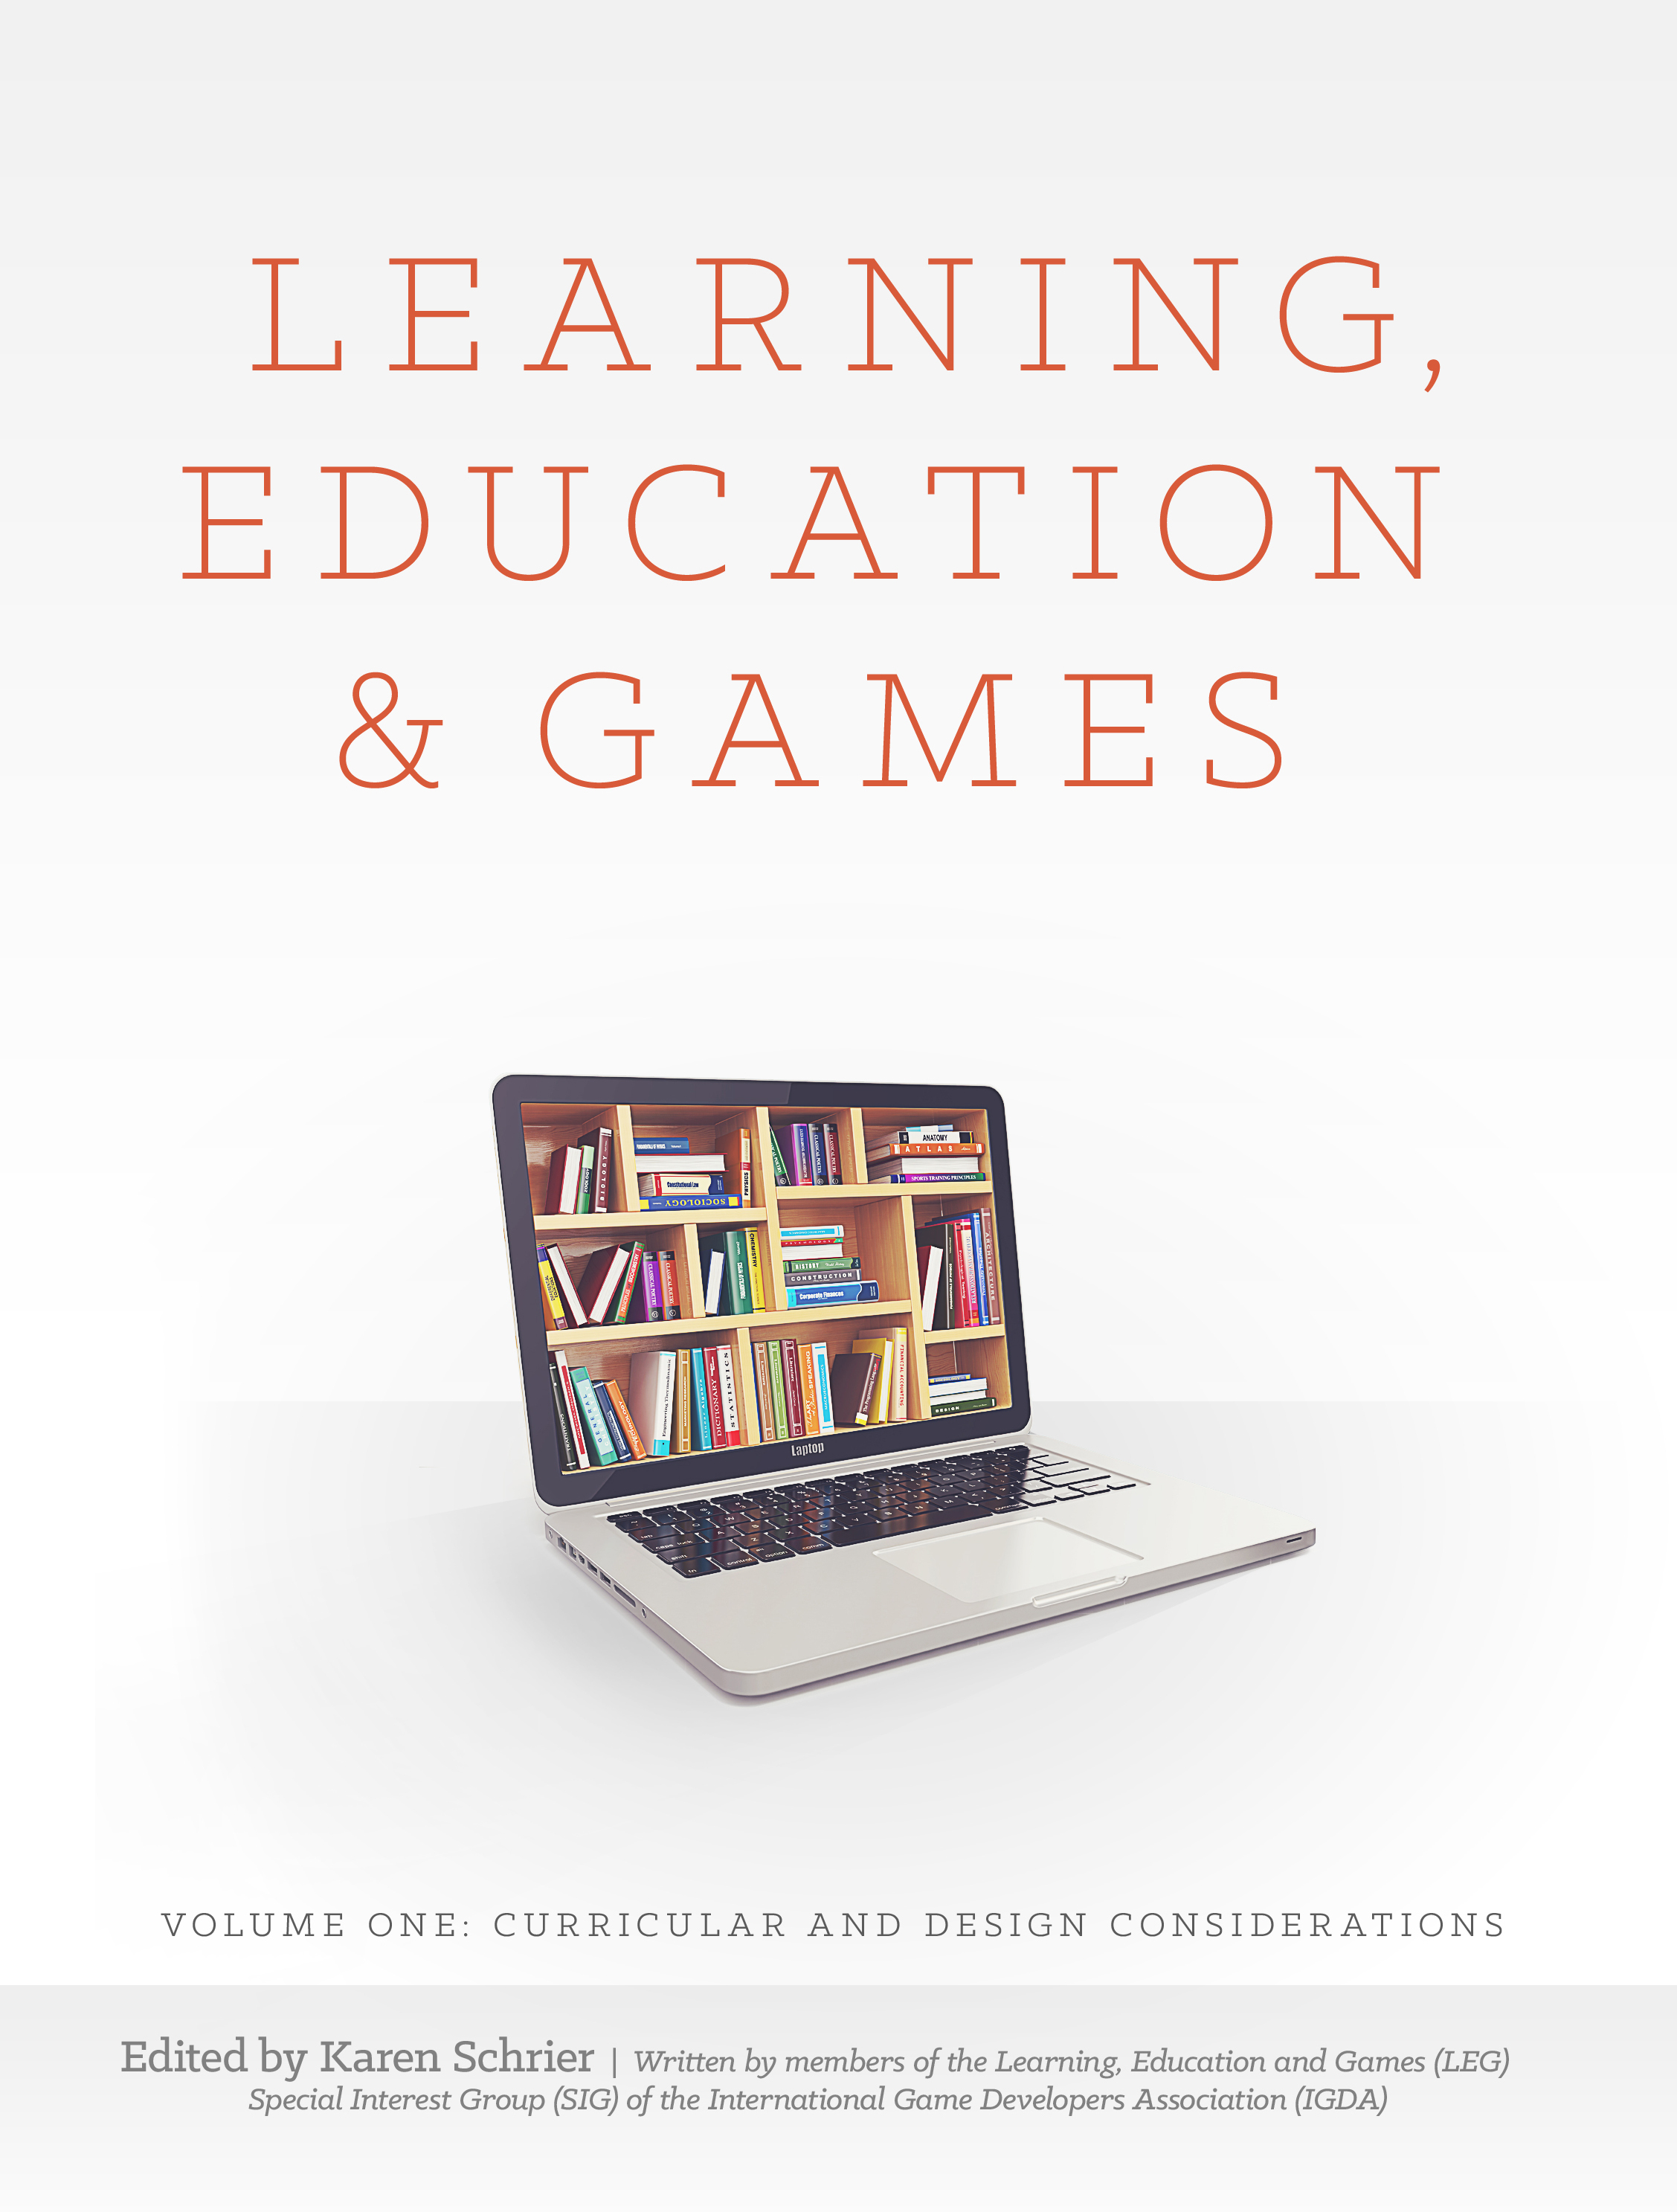 Legends of Learning brings high quality, standards aligned gaming to the  classroom – #Eduk8me